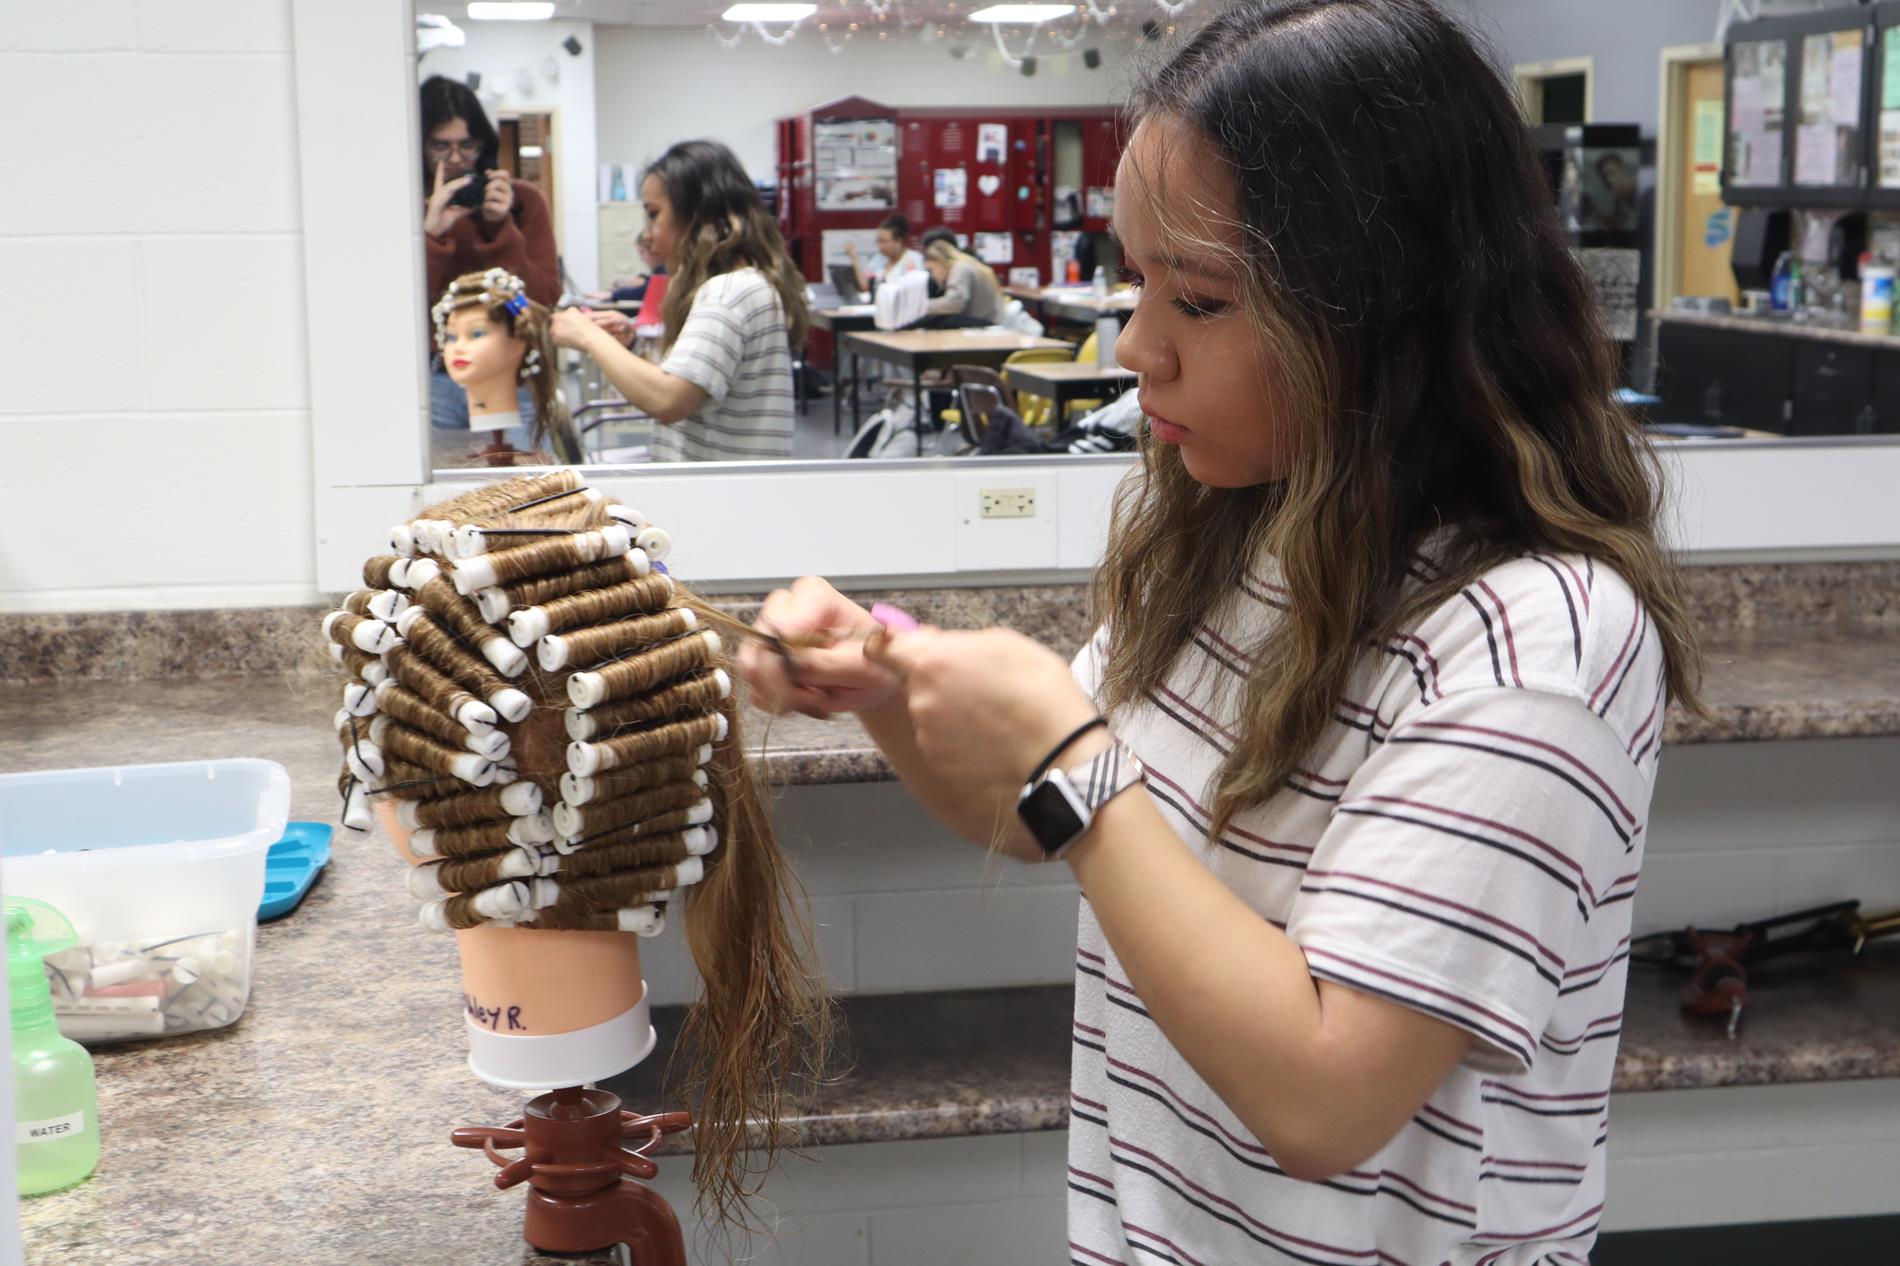 Visions School of Cosmetology is open 4 days a week so that students can get hands-on experience.